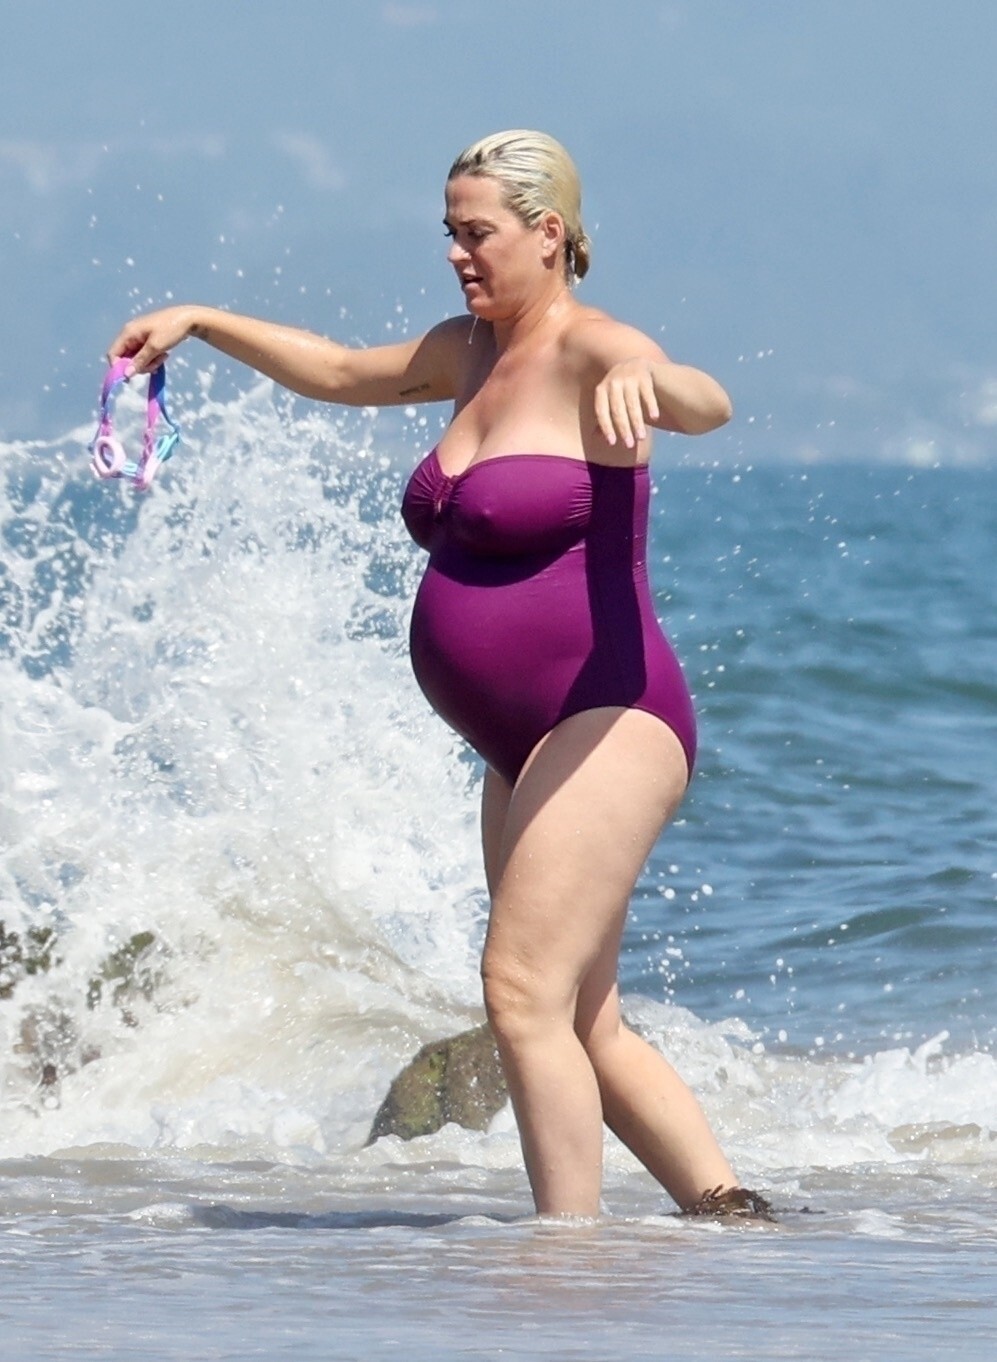 Katy Perry In A Sexy Bikini On The Beach While Pregnant TheFappening Pro 6 - Katy Perry Sexy Pregnant (52 Photos)